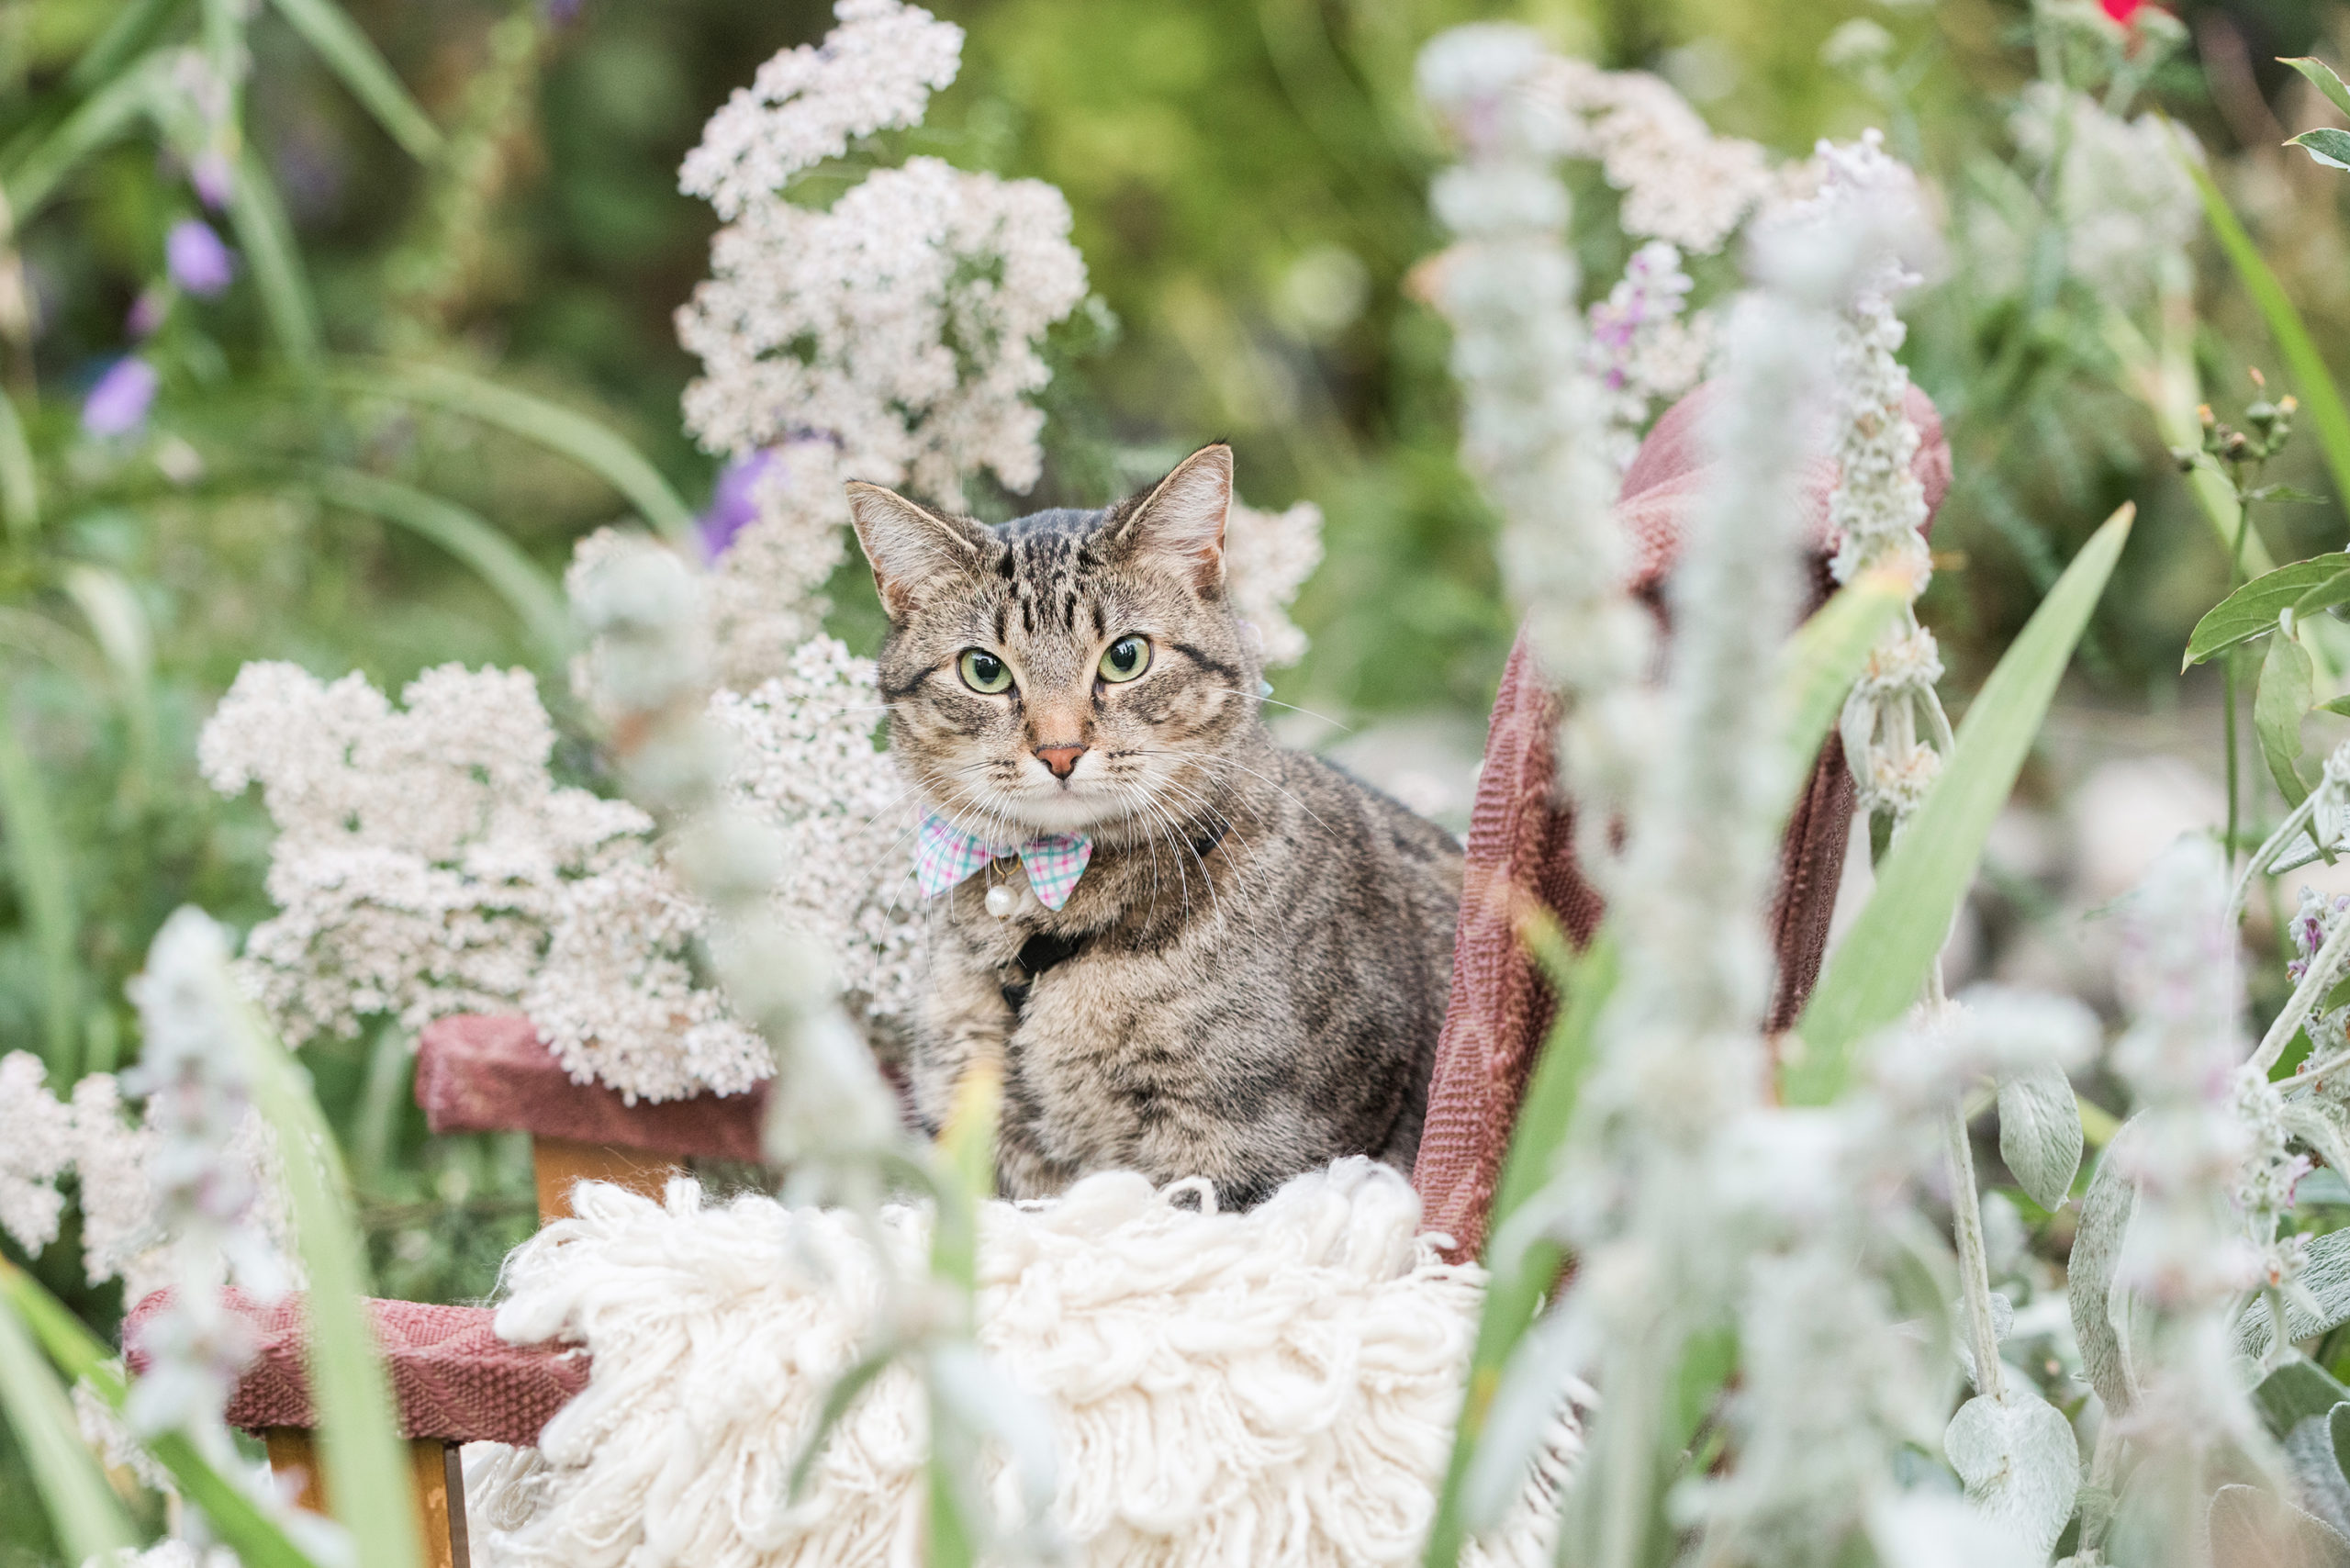 Pet in a chair in the garden for a photo.